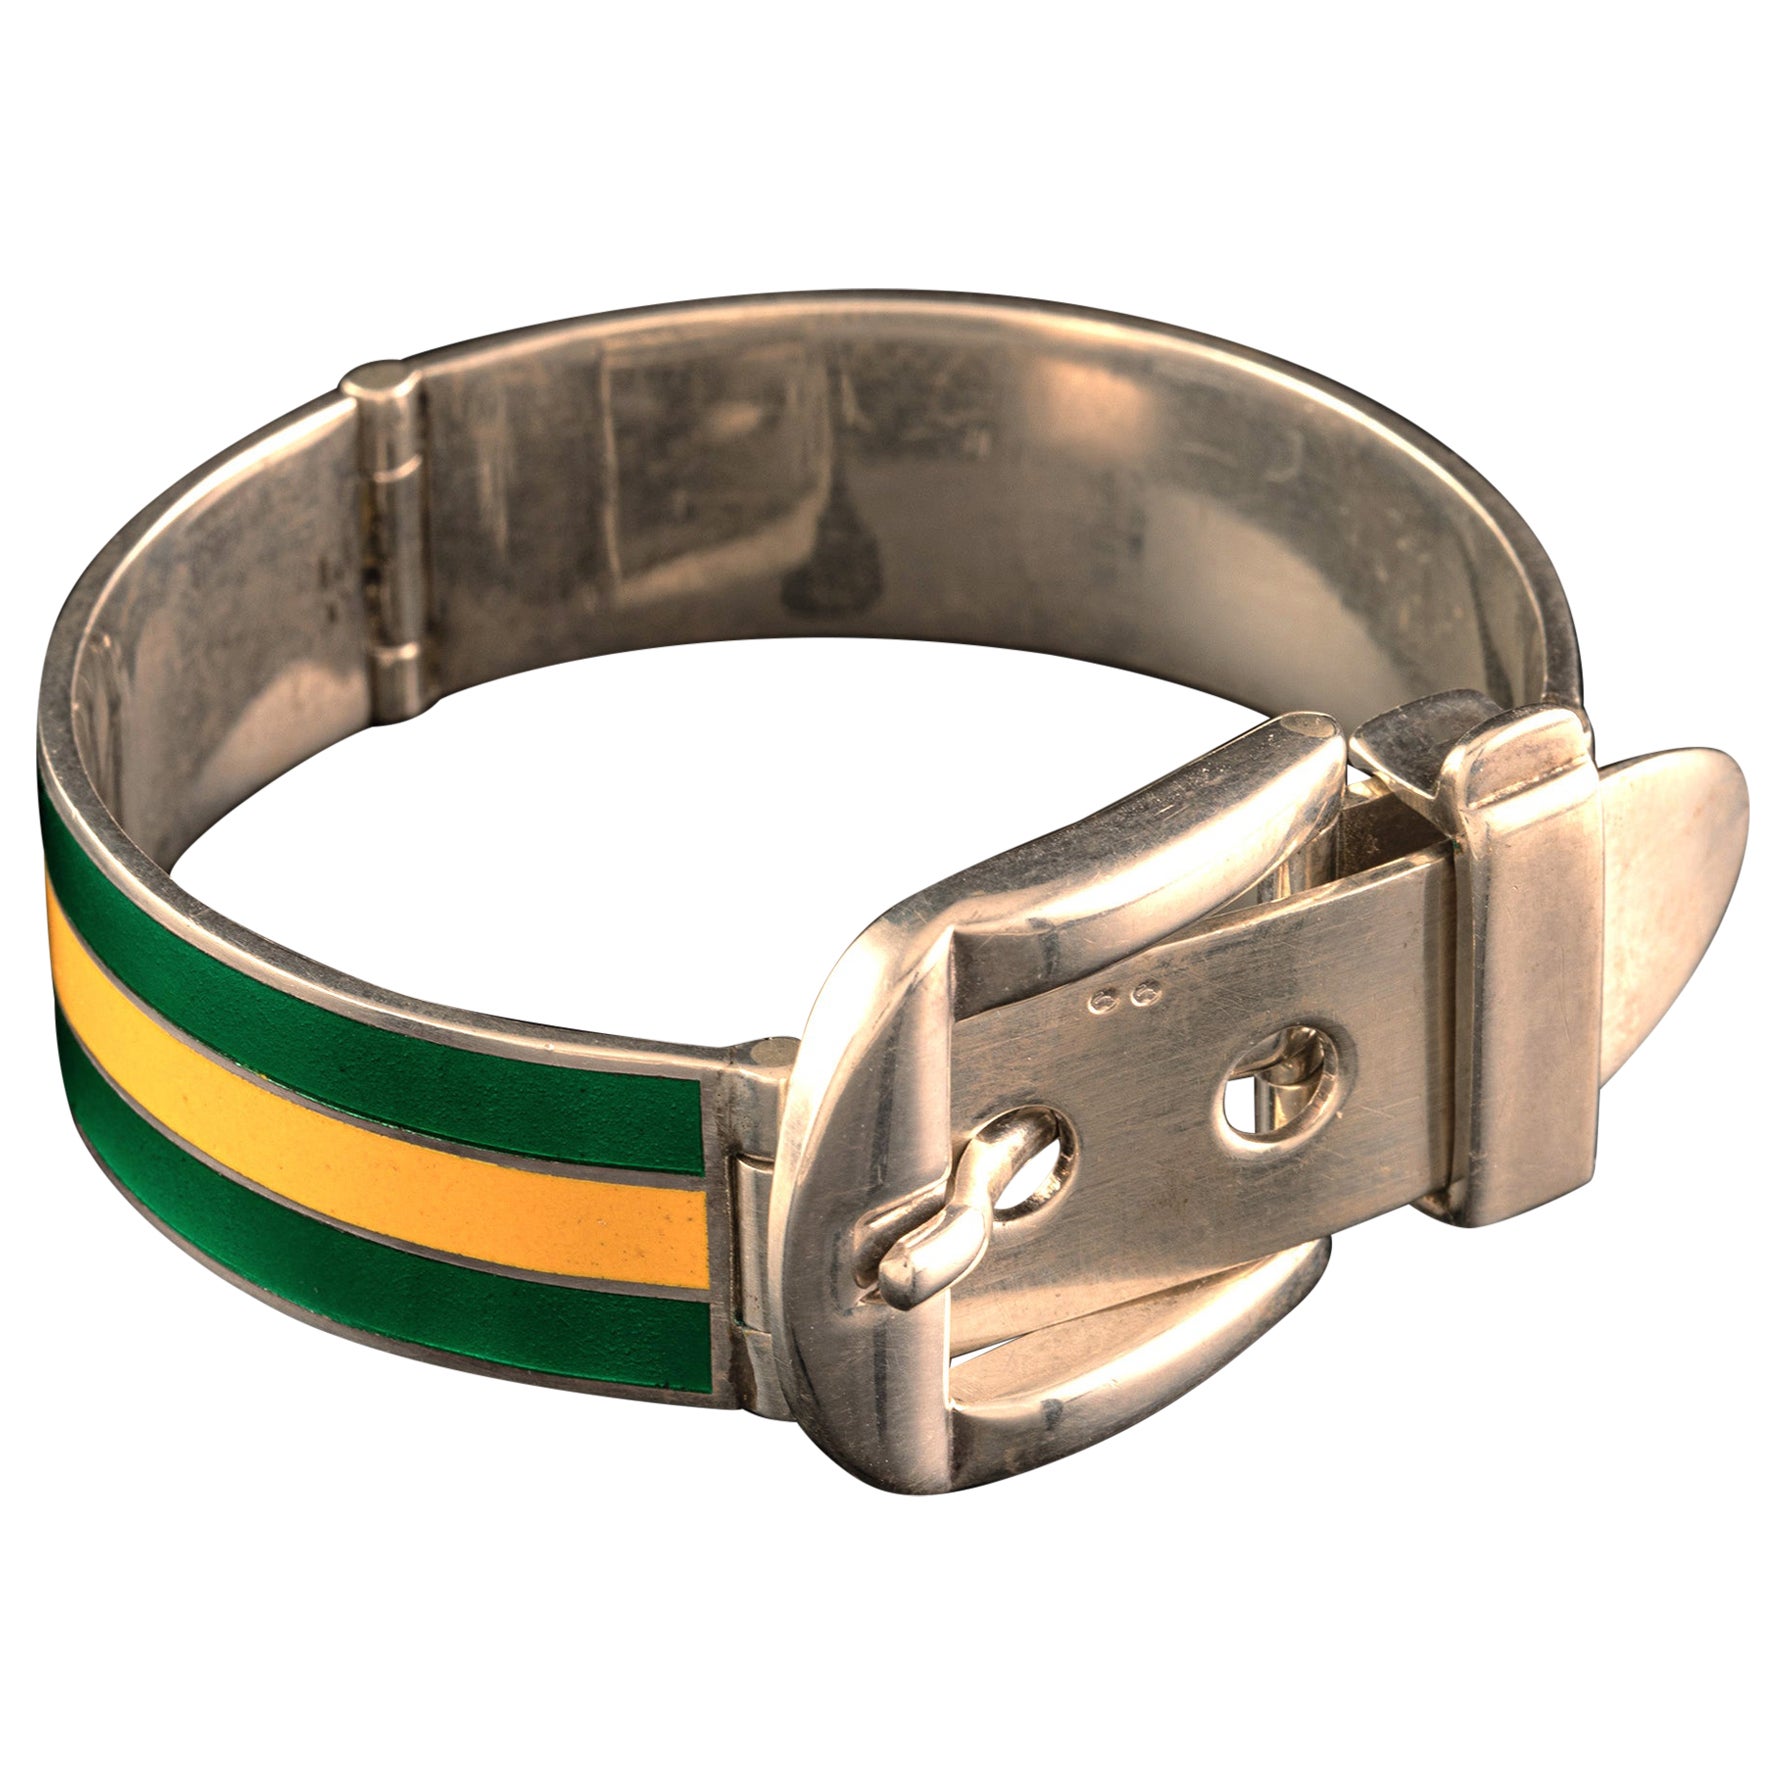 Vintage Gucci Bangle "Ceinture" Bracelet Made in Silver and Green-Yellow Enamel For Sale